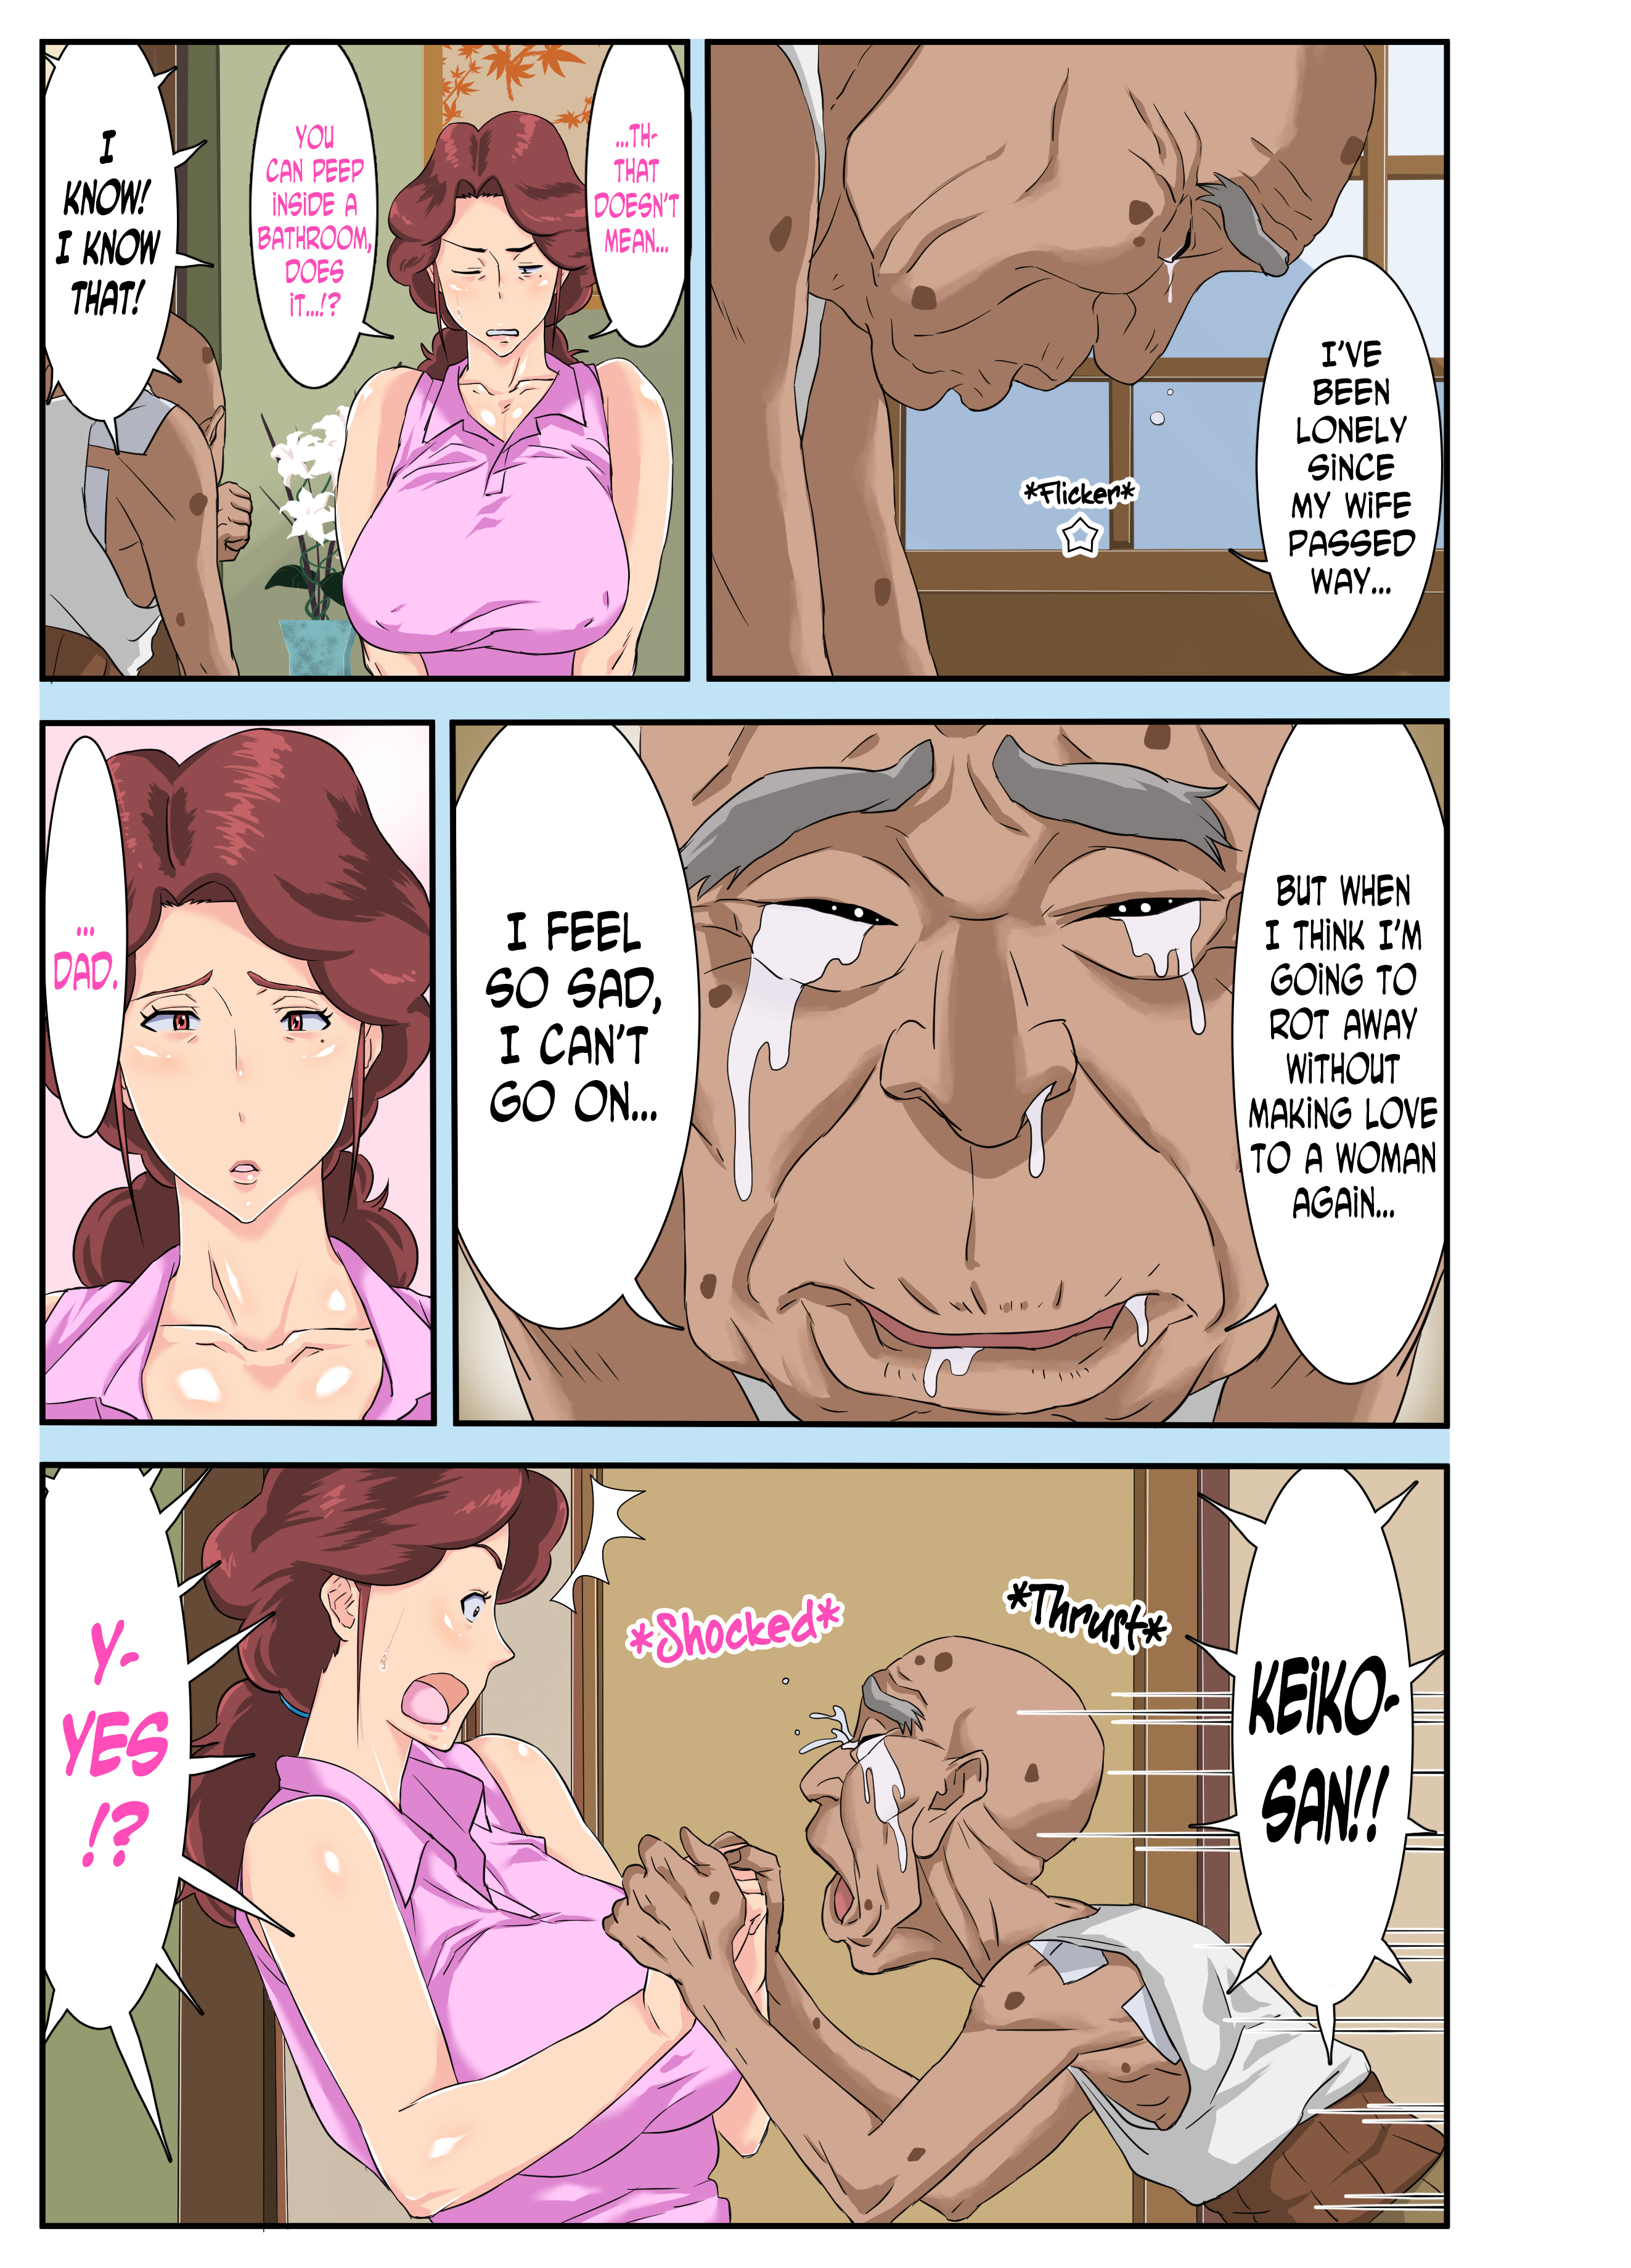 Dirty old man fucks his busty daughter while her husband sleeps - sex comics picture